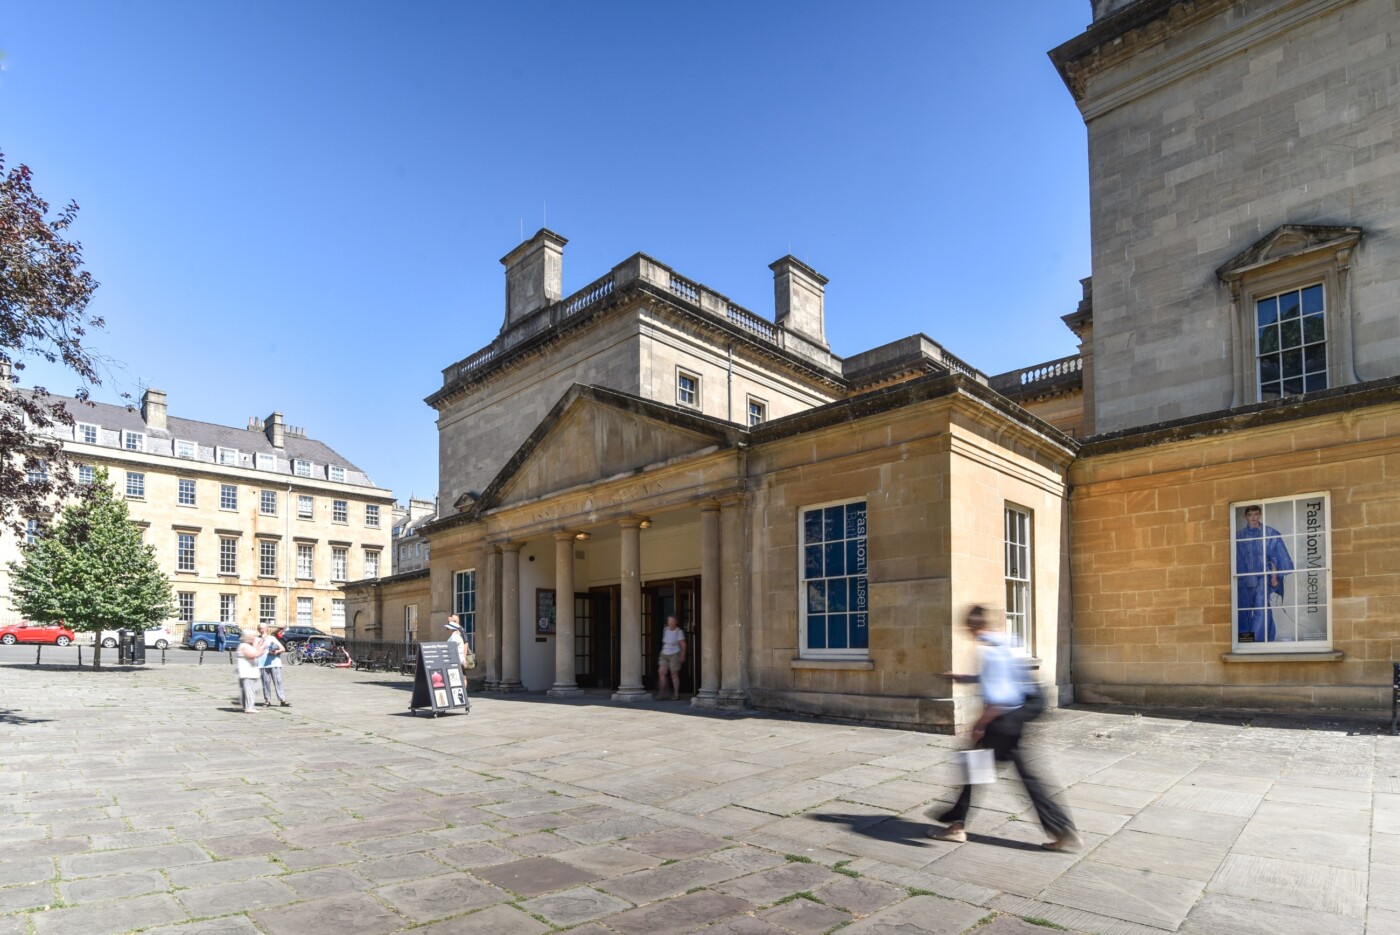 Plunge pool discovery at Bath Assembly Rooms